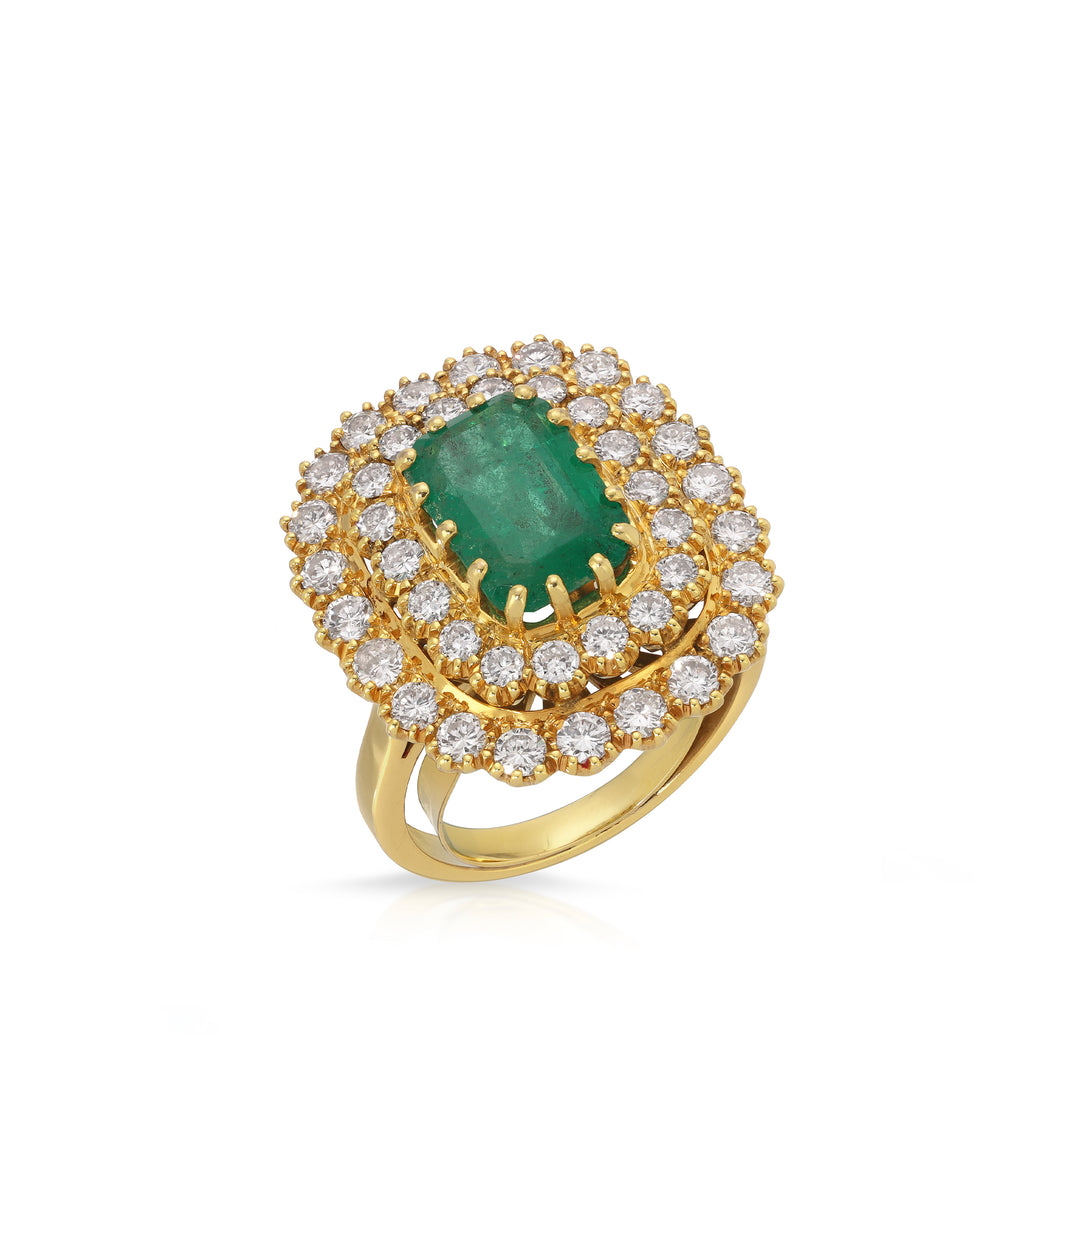 Emerald & Diamond Cocktail Ring in 14K Gold